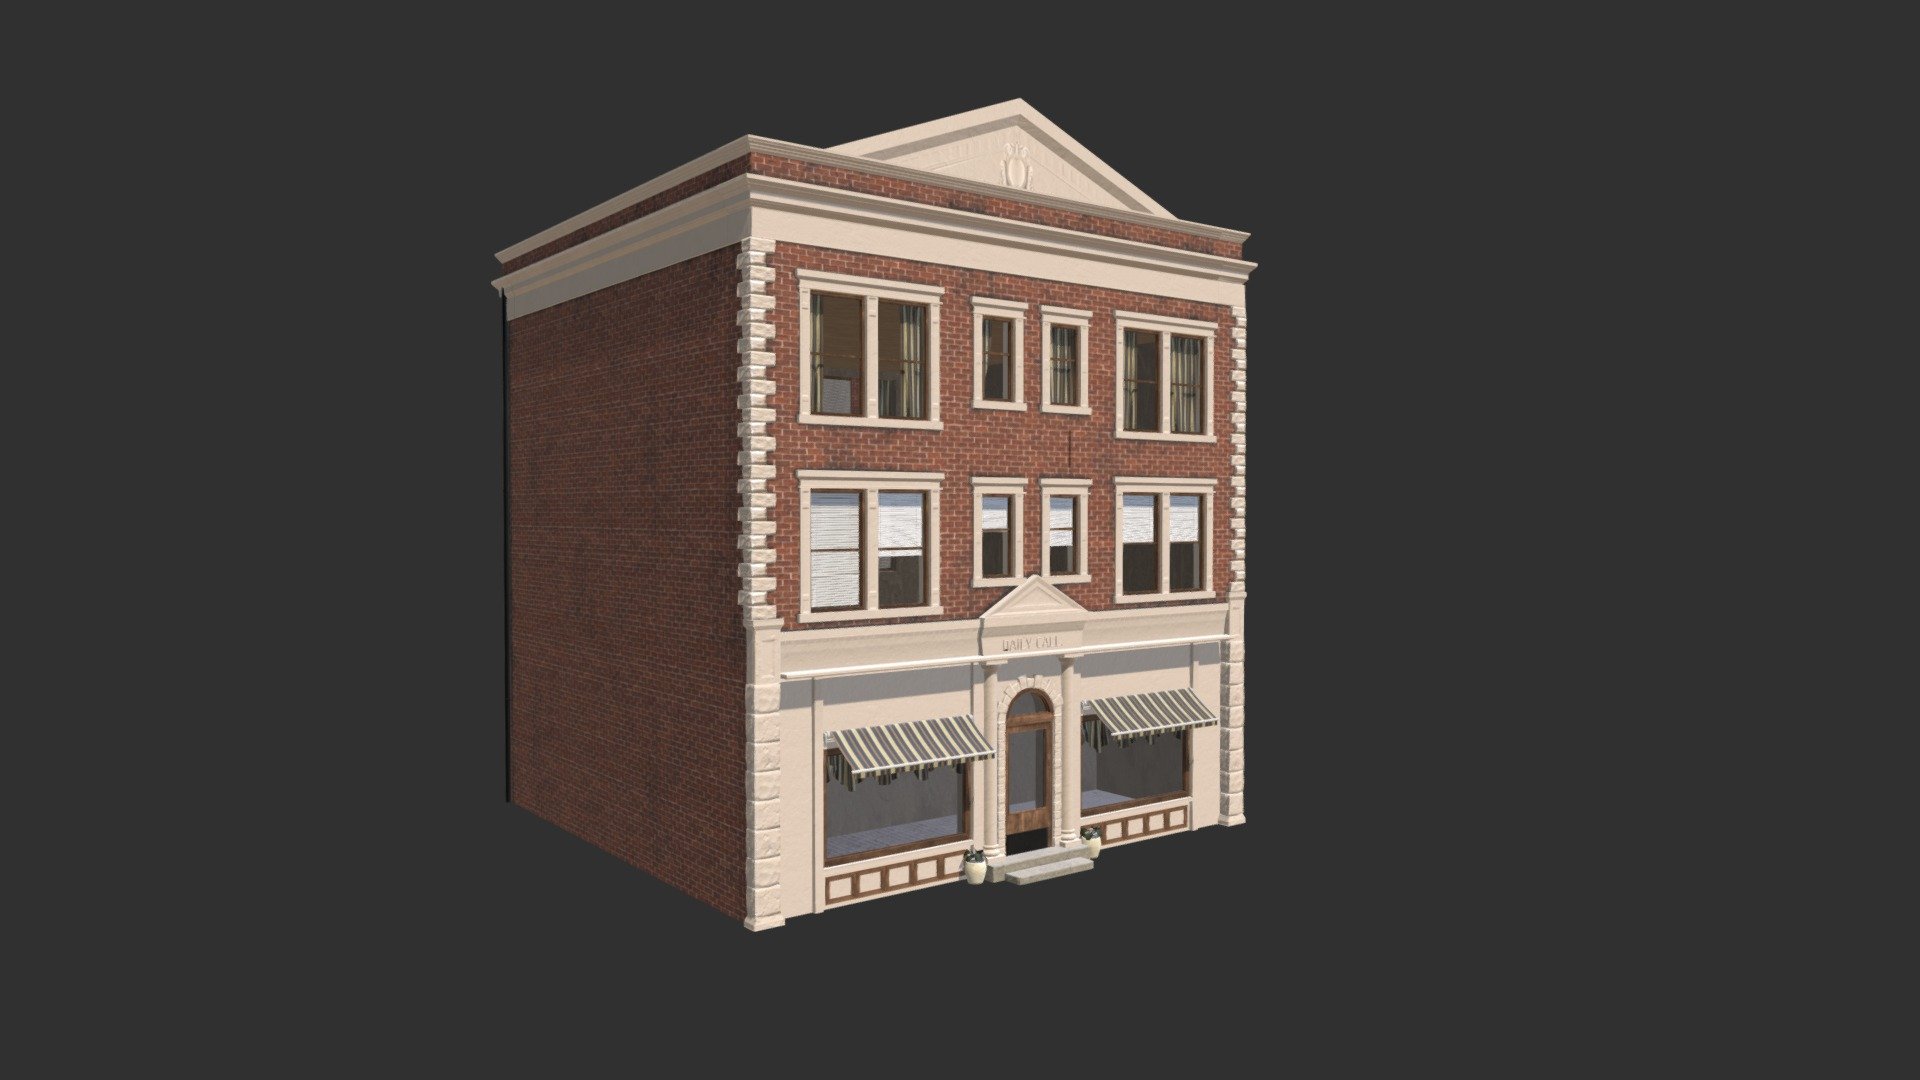 A 3D model of a low poly neoclassical building.
Exterior with interior walls and window shades 3d model